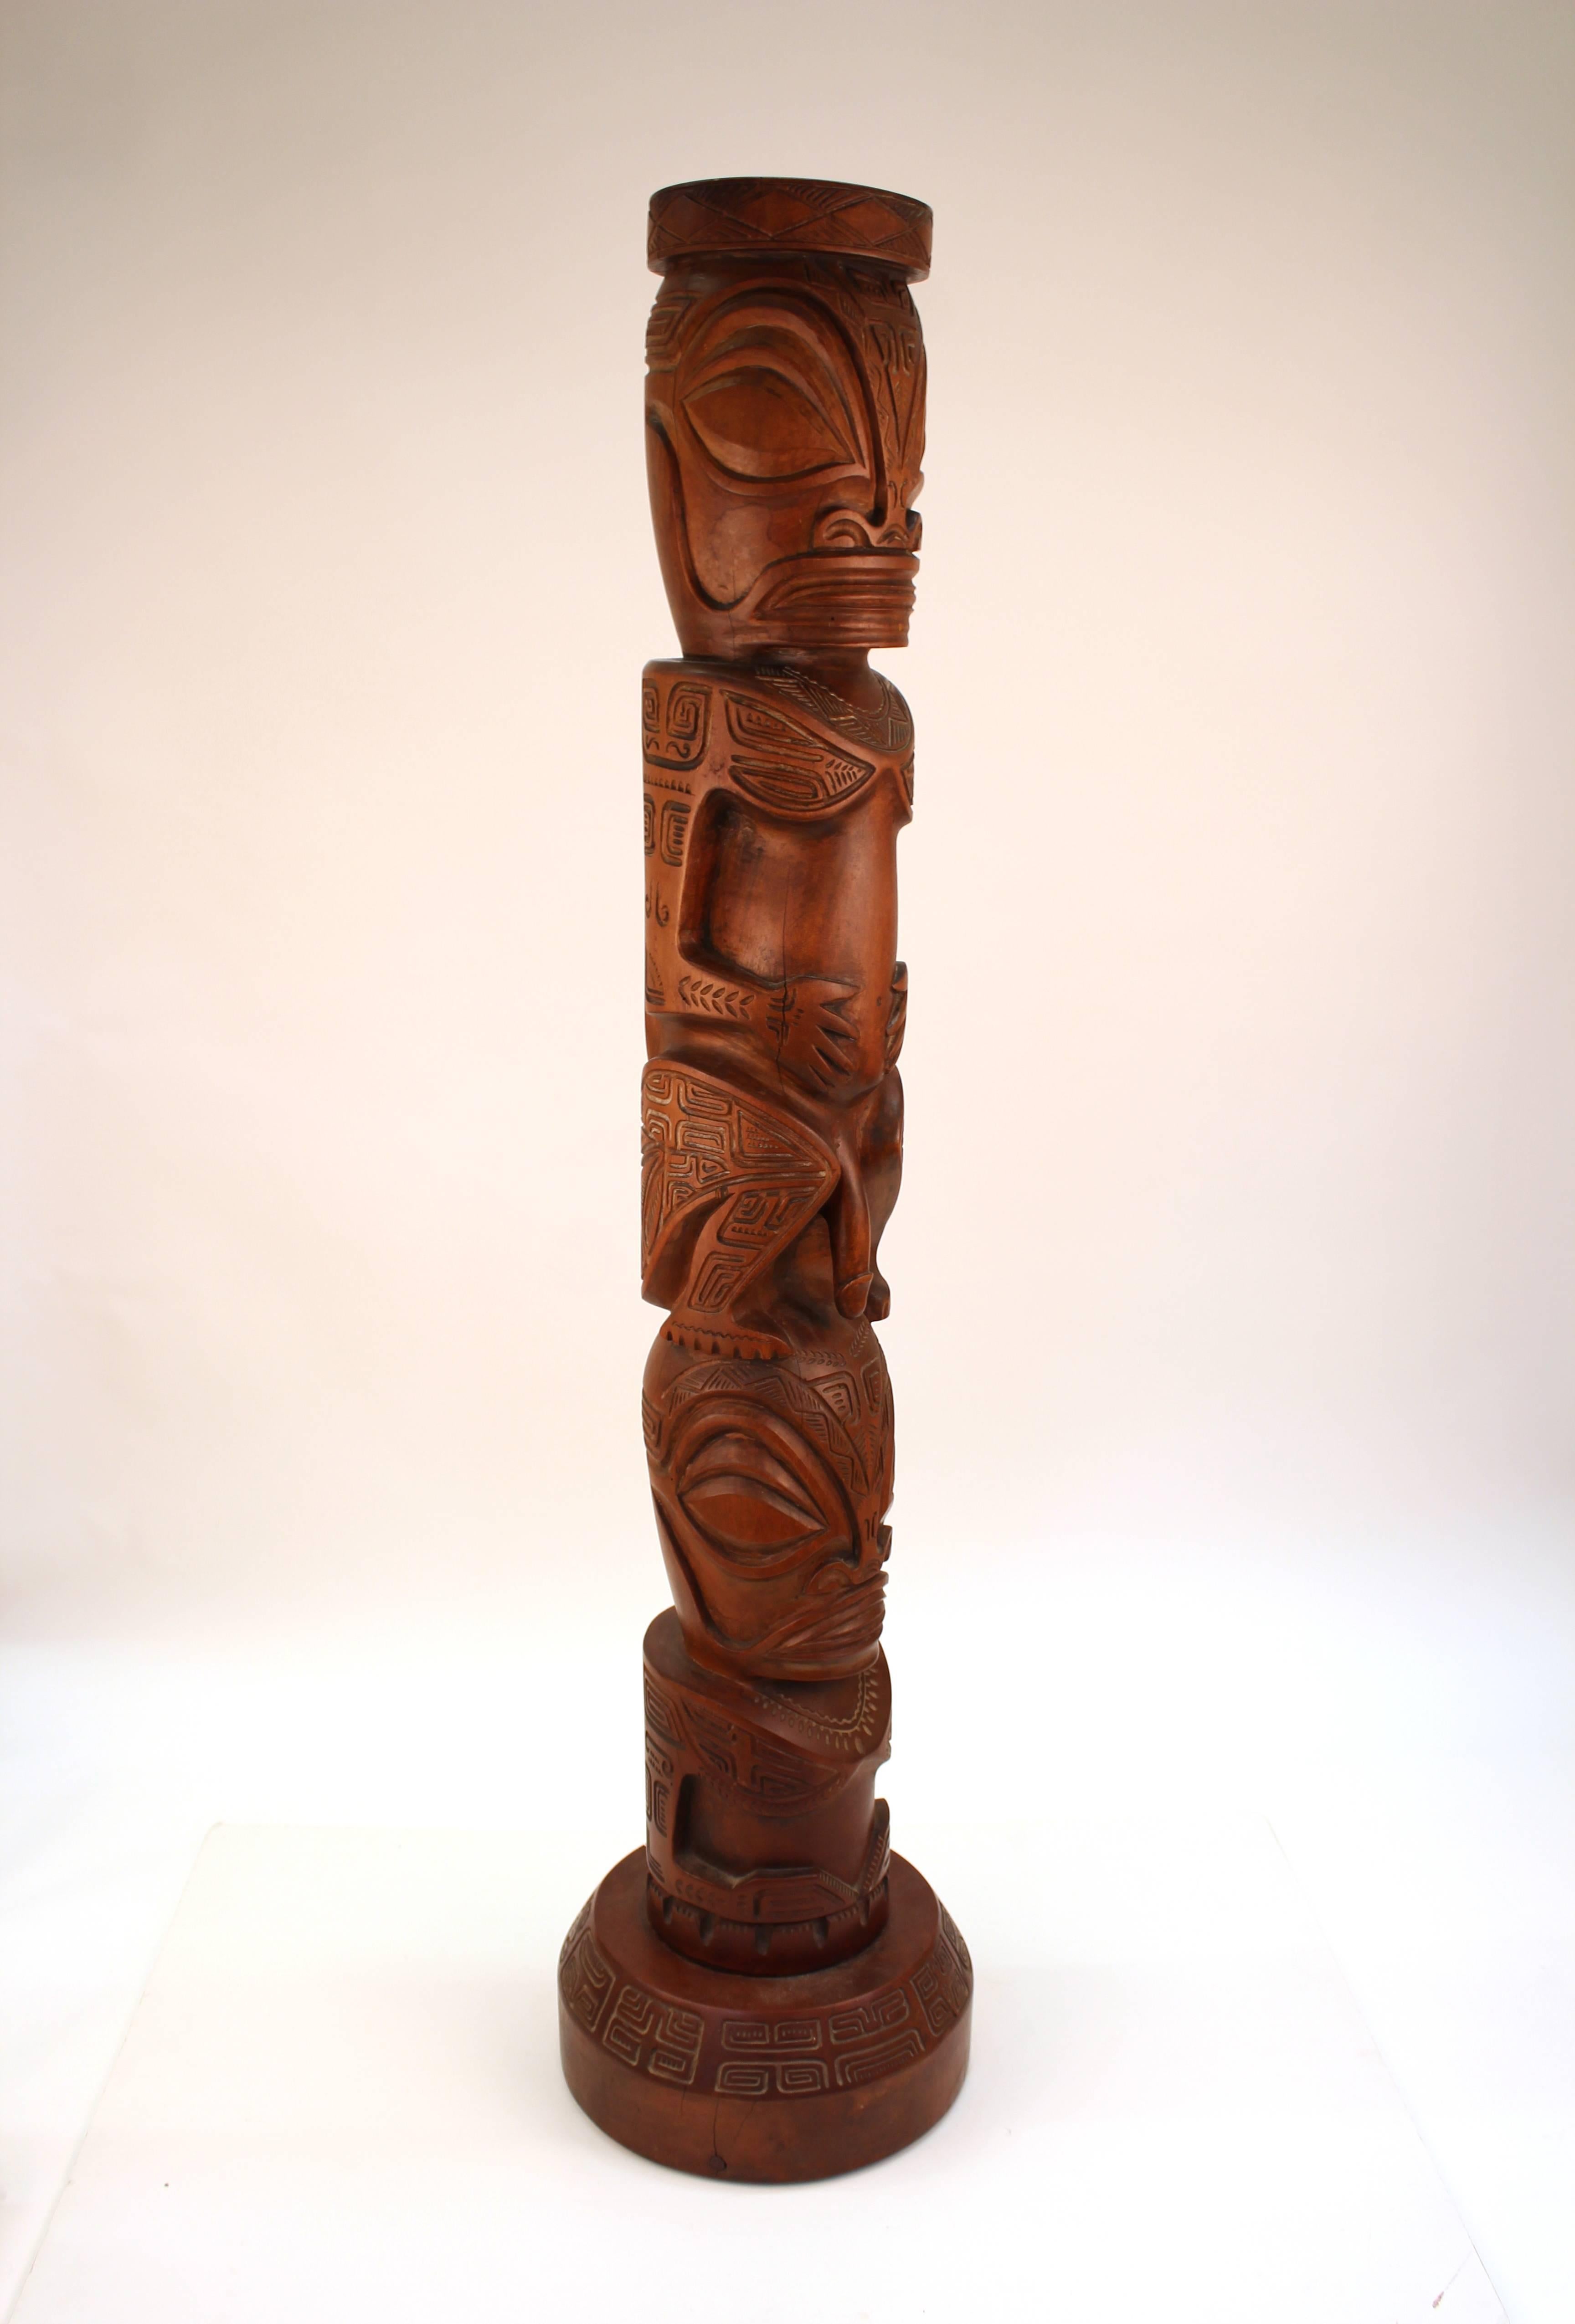 Decorative TOTEM sculpture after the style of the Marquesas Islands. Crafted in carved wood with a full nude human figure sitting atop another nude ending at the waist. The sculpture stands on around base and is intricately carved with geometric